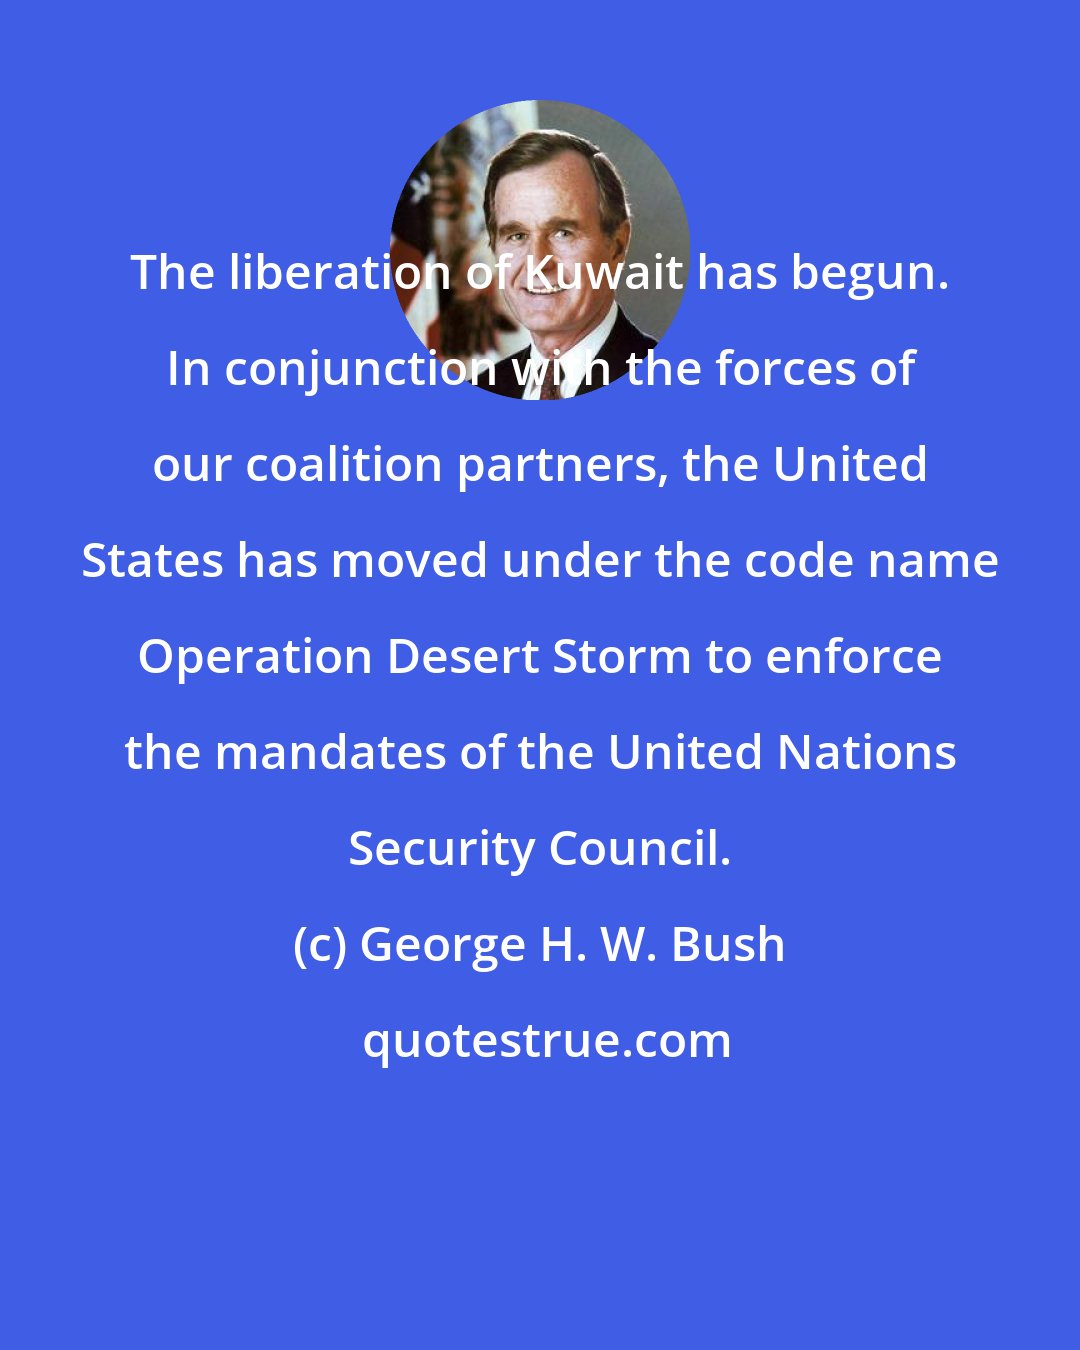 George H. W. Bush: The liberation of Kuwait has begun. In conjunction with the forces of our coalition partners, the United States has moved under the code name Operation Desert Storm to enforce the mandates of the United Nations Security Council.